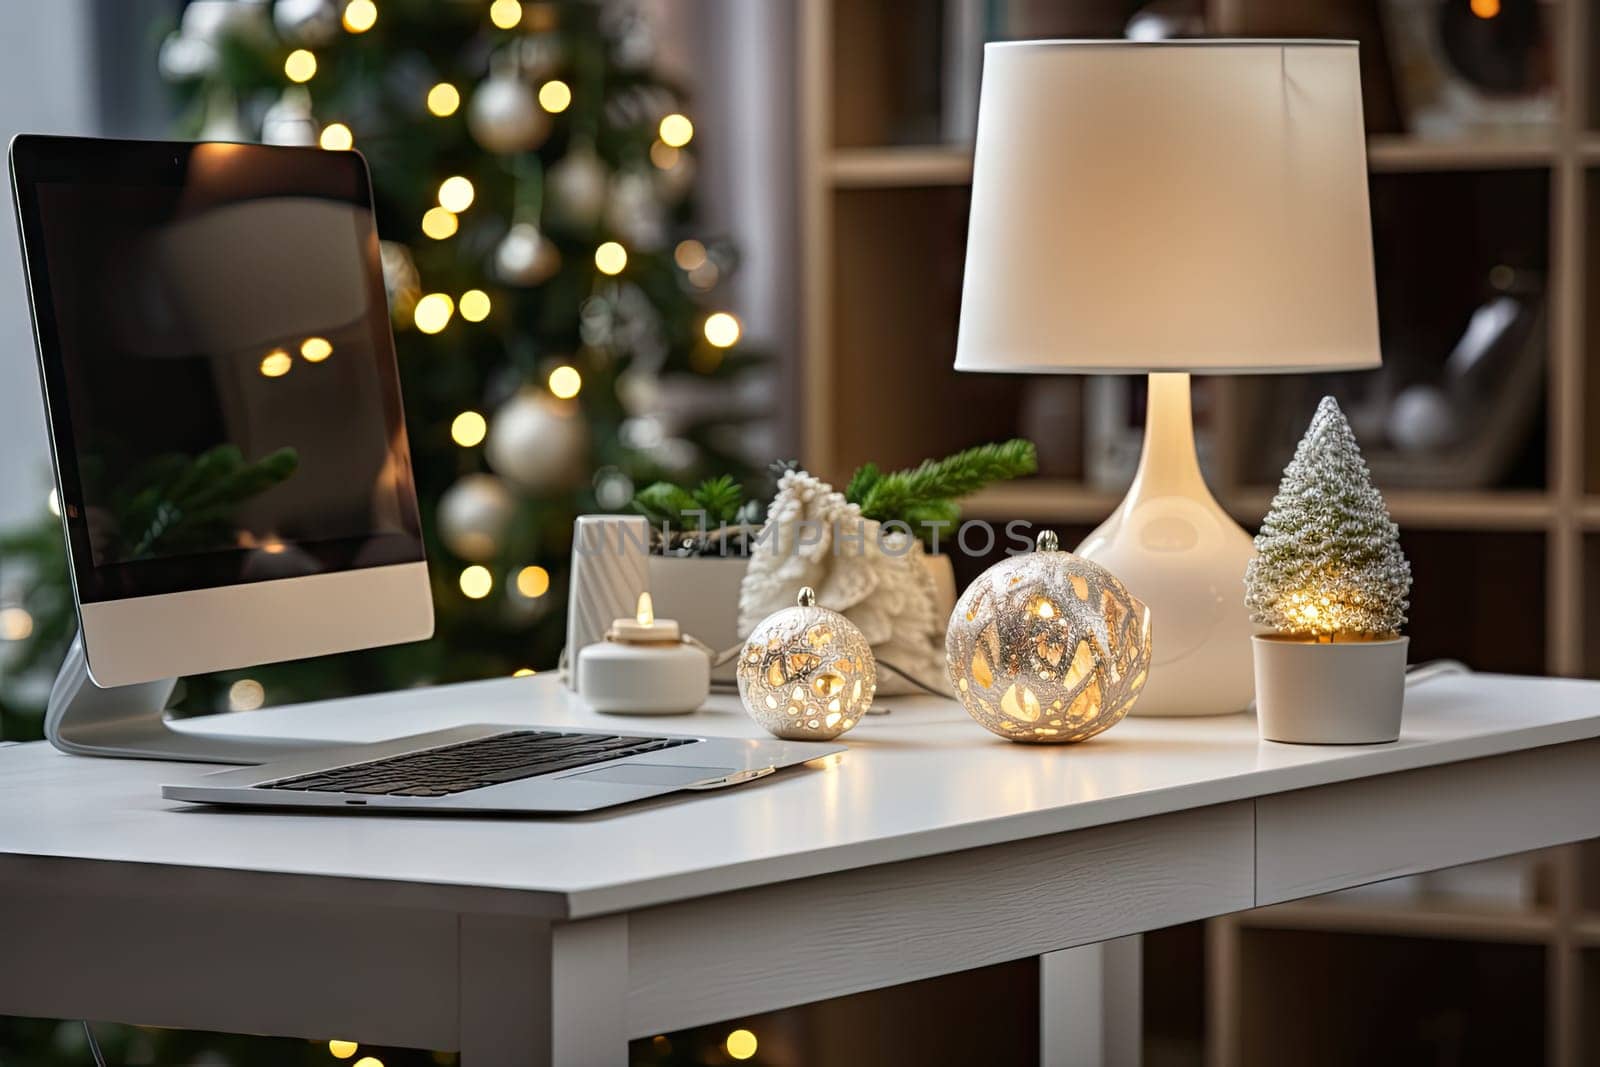 a computer on a desk with christmas decorations and lights in front of the monitor, which is sitting on a white table